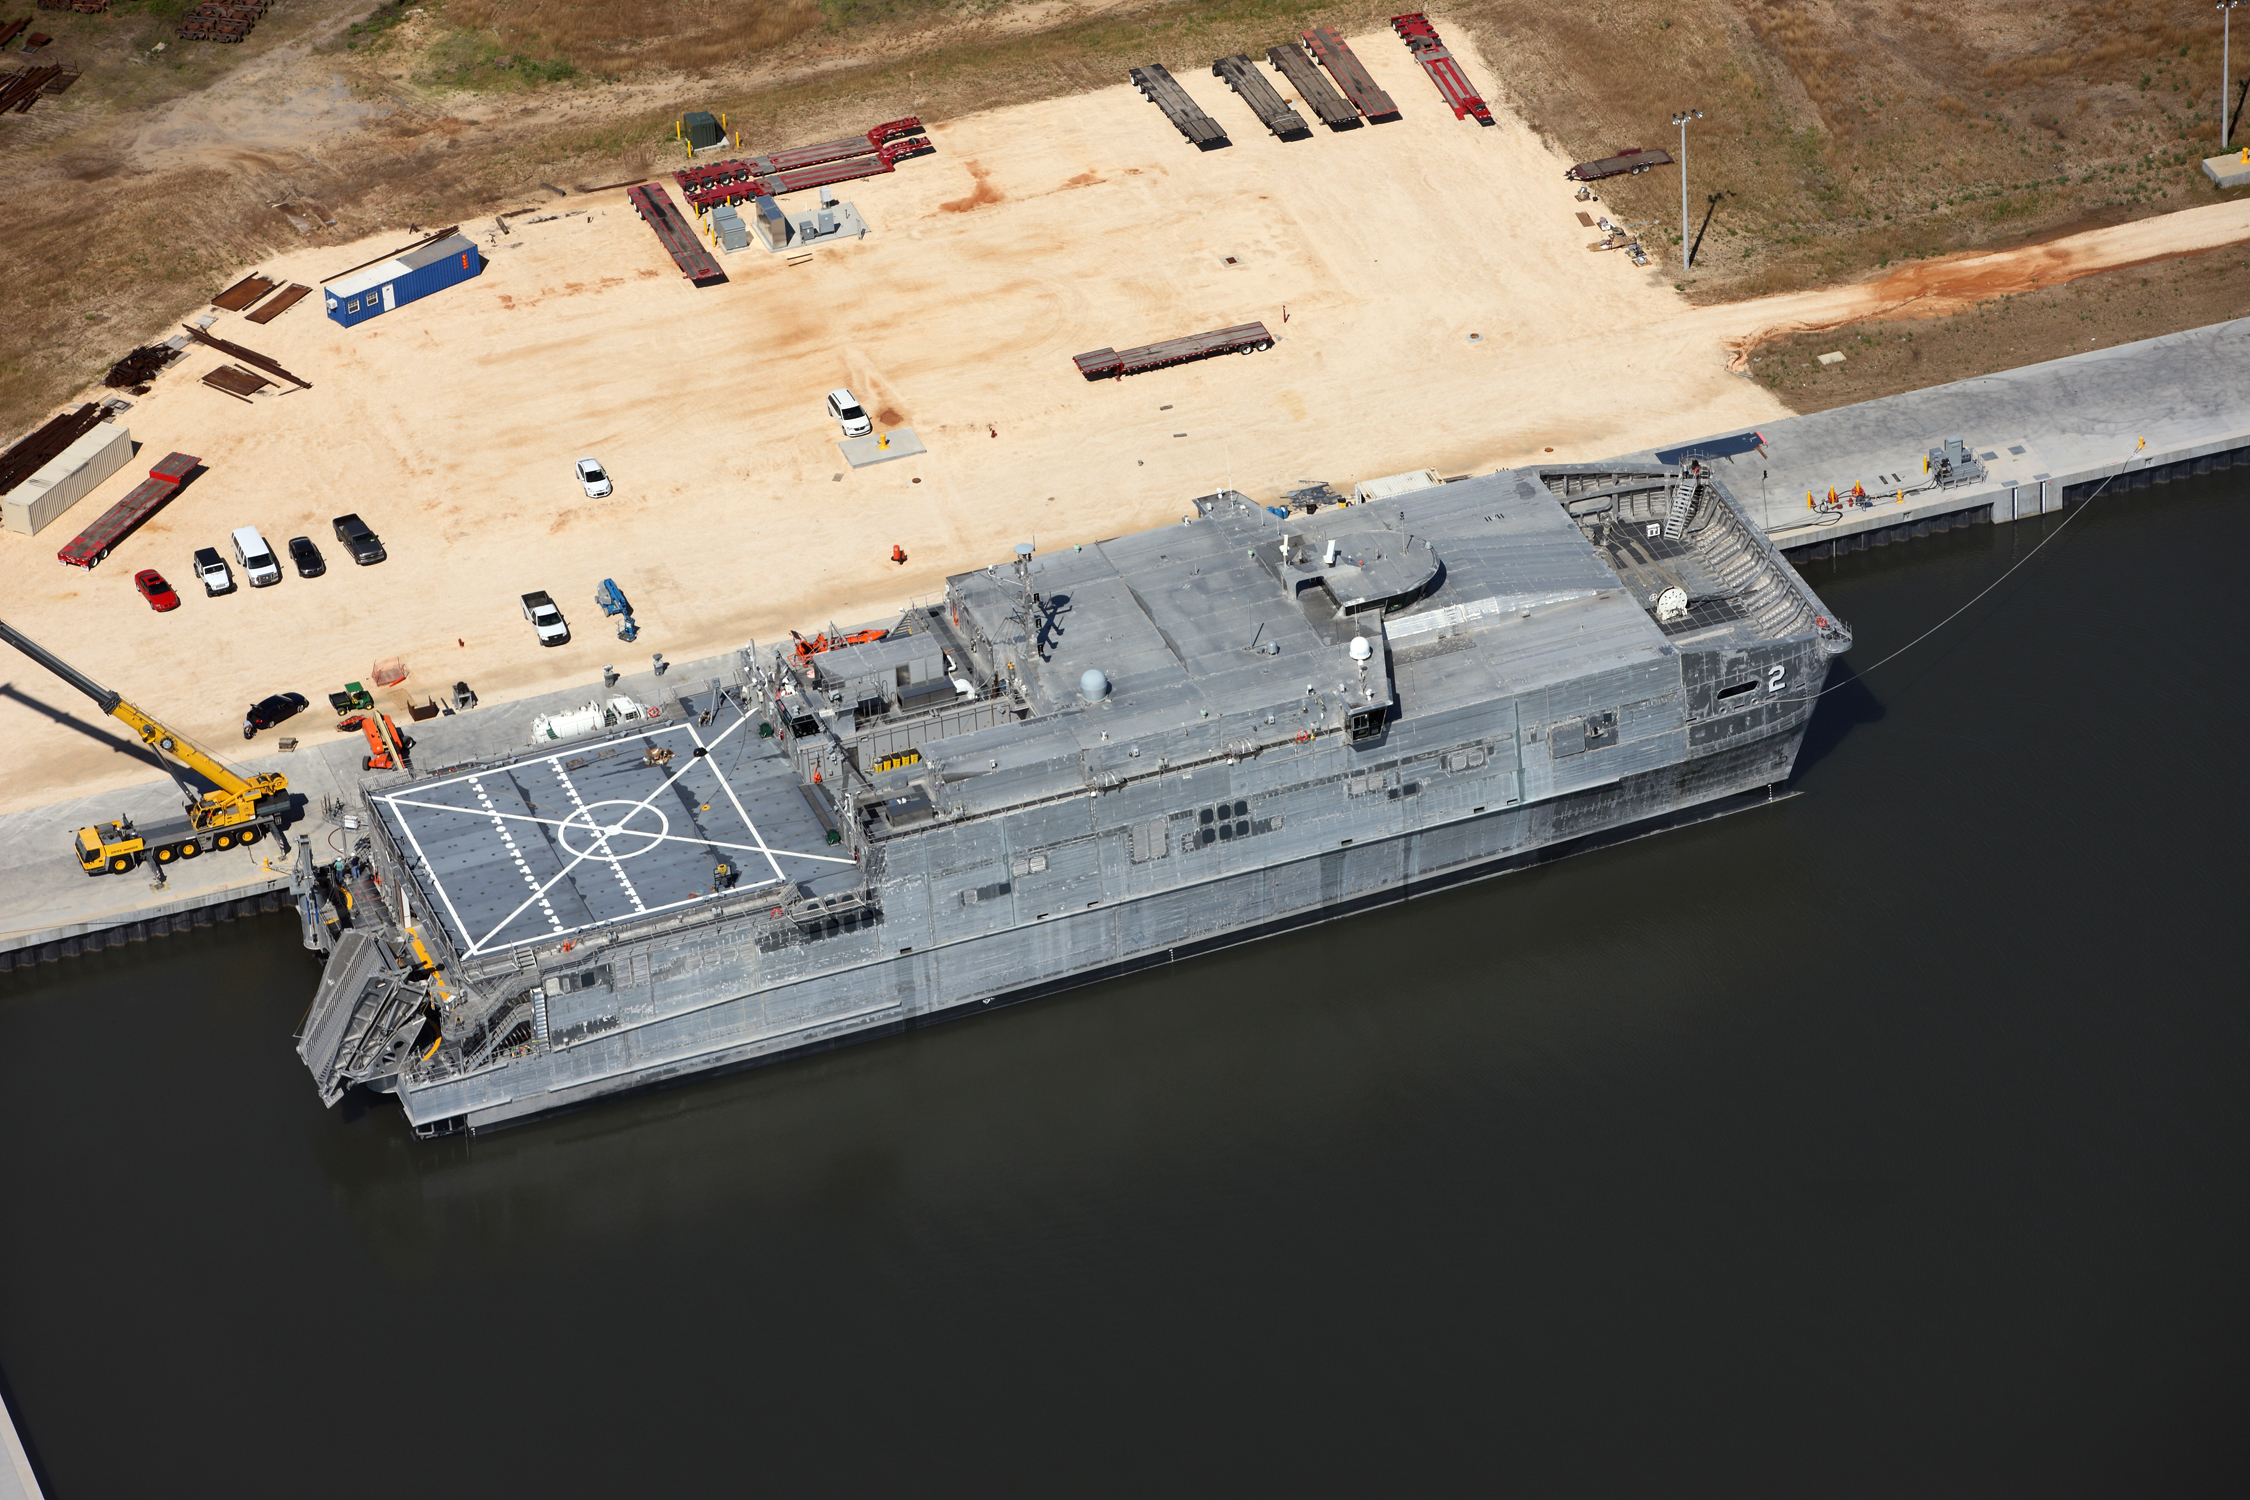 Austal Expeditionary Fast Transport ships